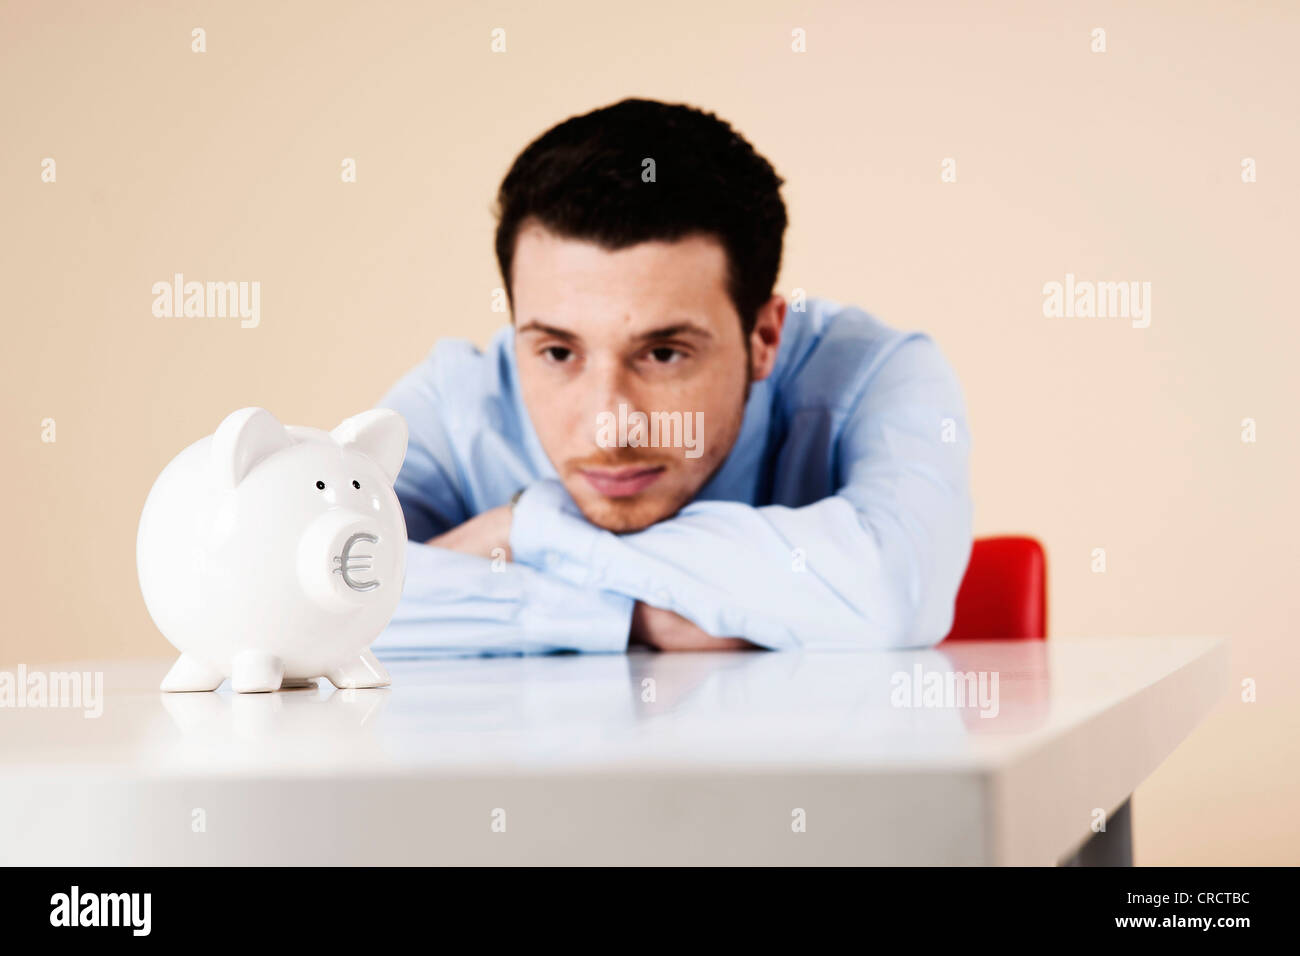 Young man sitting in front of piggy bank Stock Photo